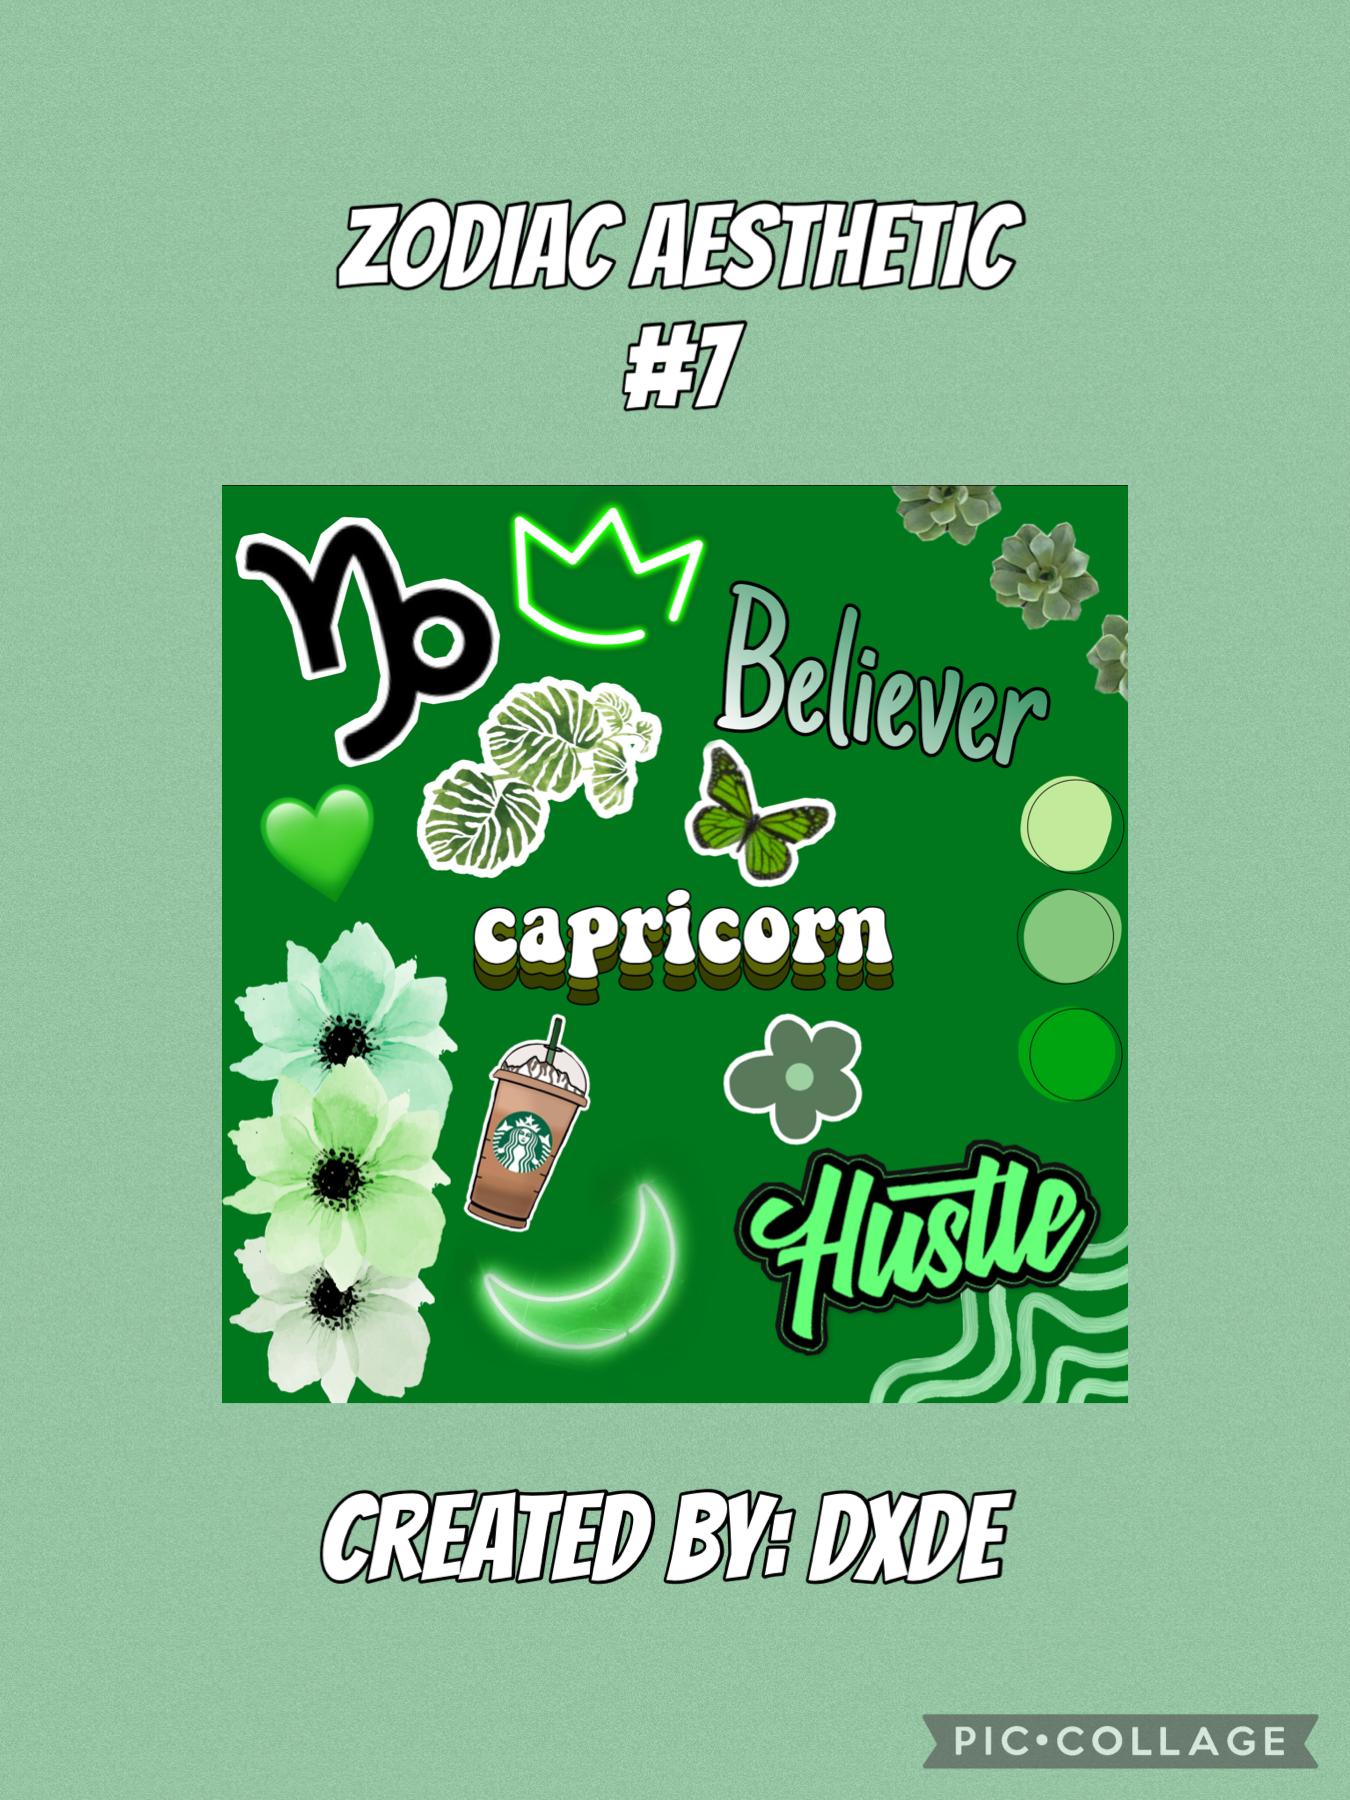 Enjoy this Aesthetic, Different Zodiacs coming soon! #capricorn♑️